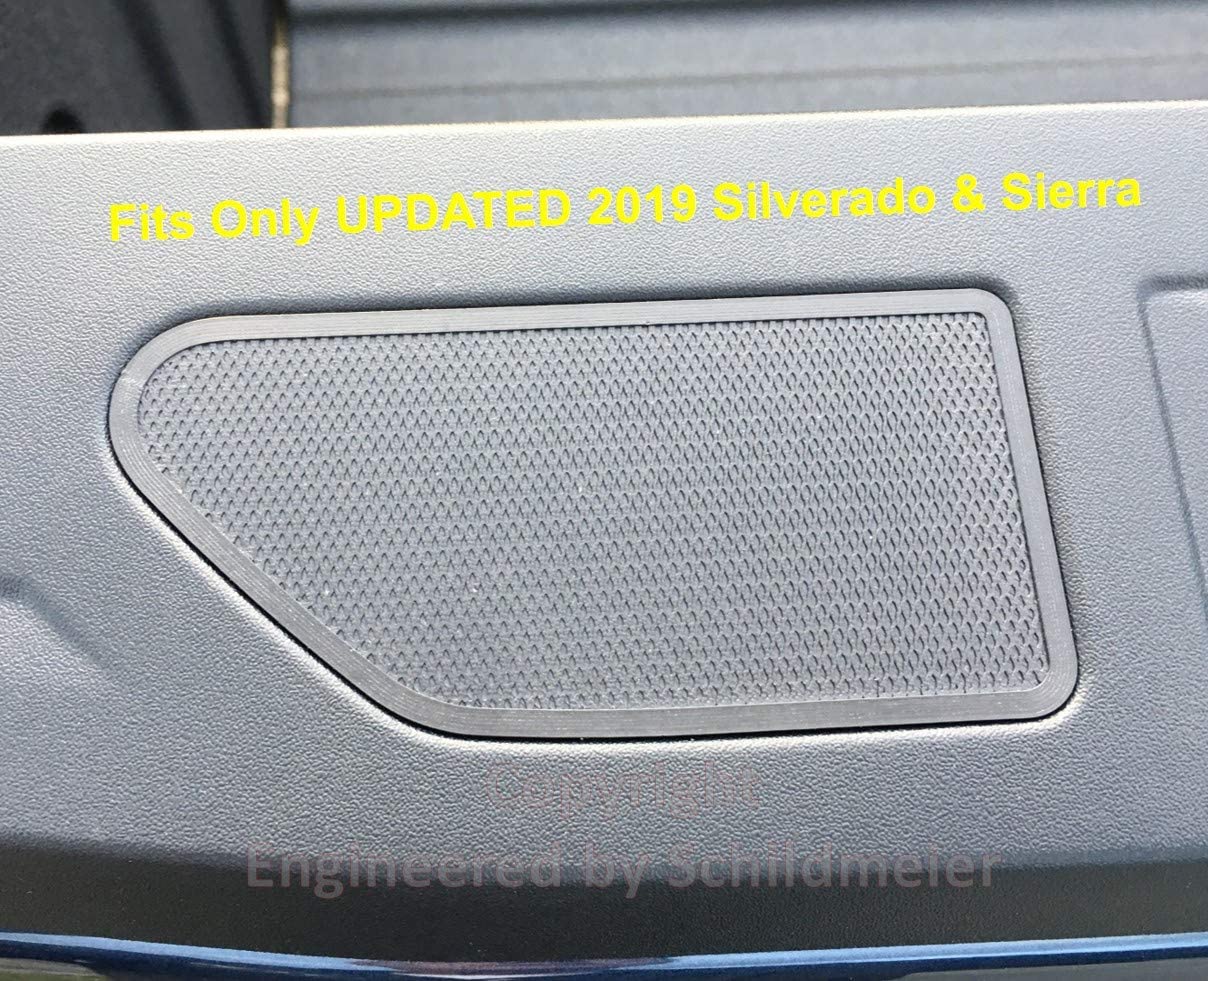 Close up of Railcaps stake pocket cover fit flush into black truck bed rail with text overlay - Fits only UPDATED 2019 Silverado & Sierra. Image is copyright Engineered by Schildmeier.